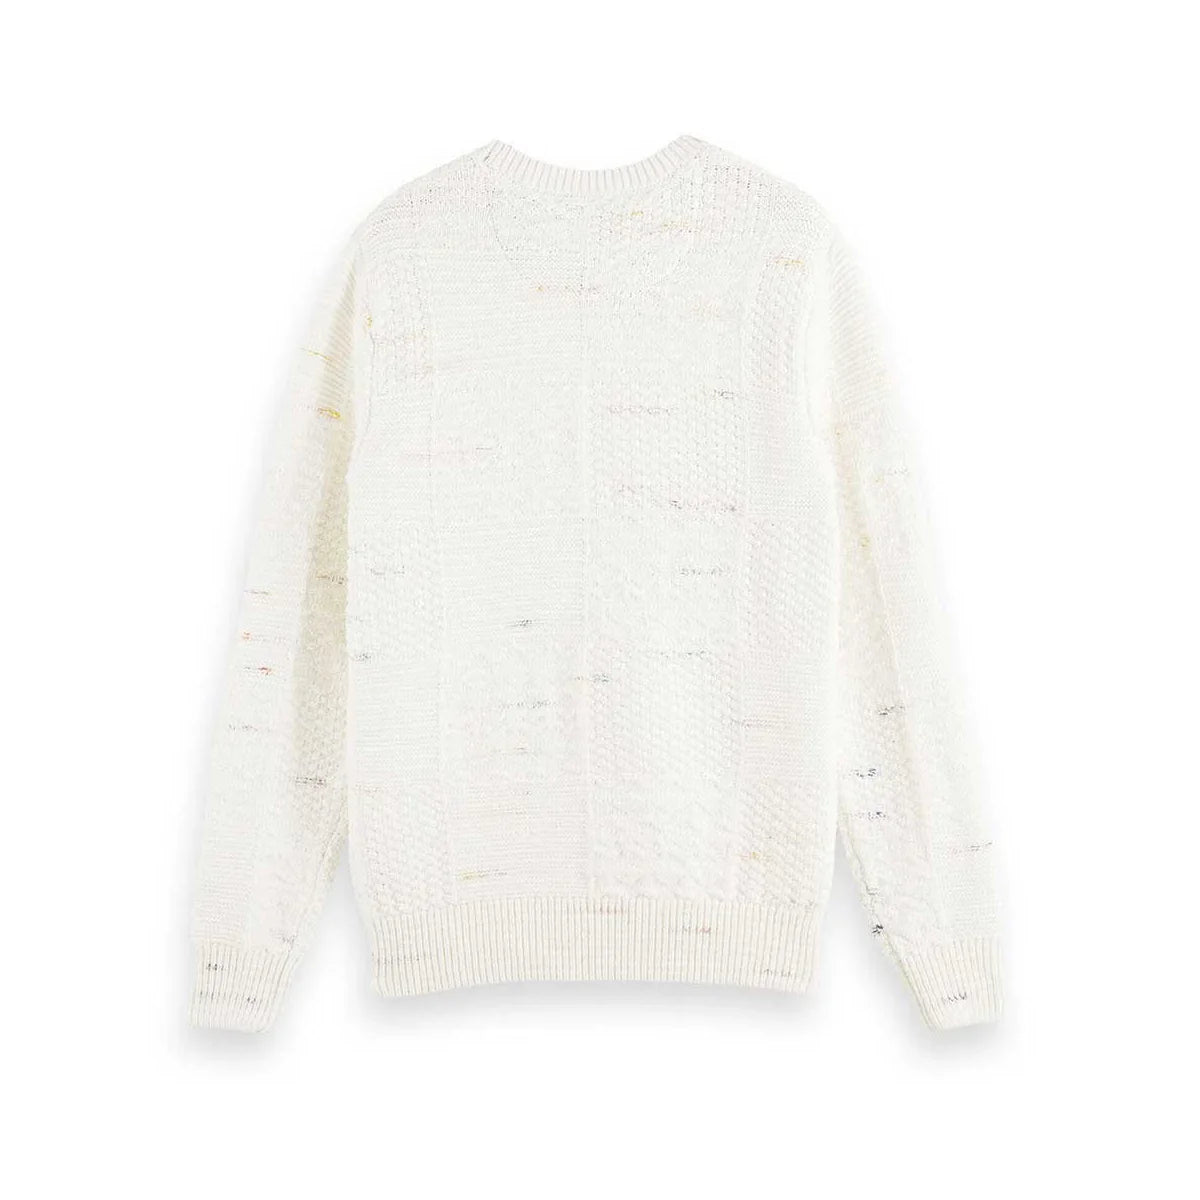 'Scotch & Soda Space-Dye Yarn Structured Cotton-Blend Sweater' in 'Off White' colour